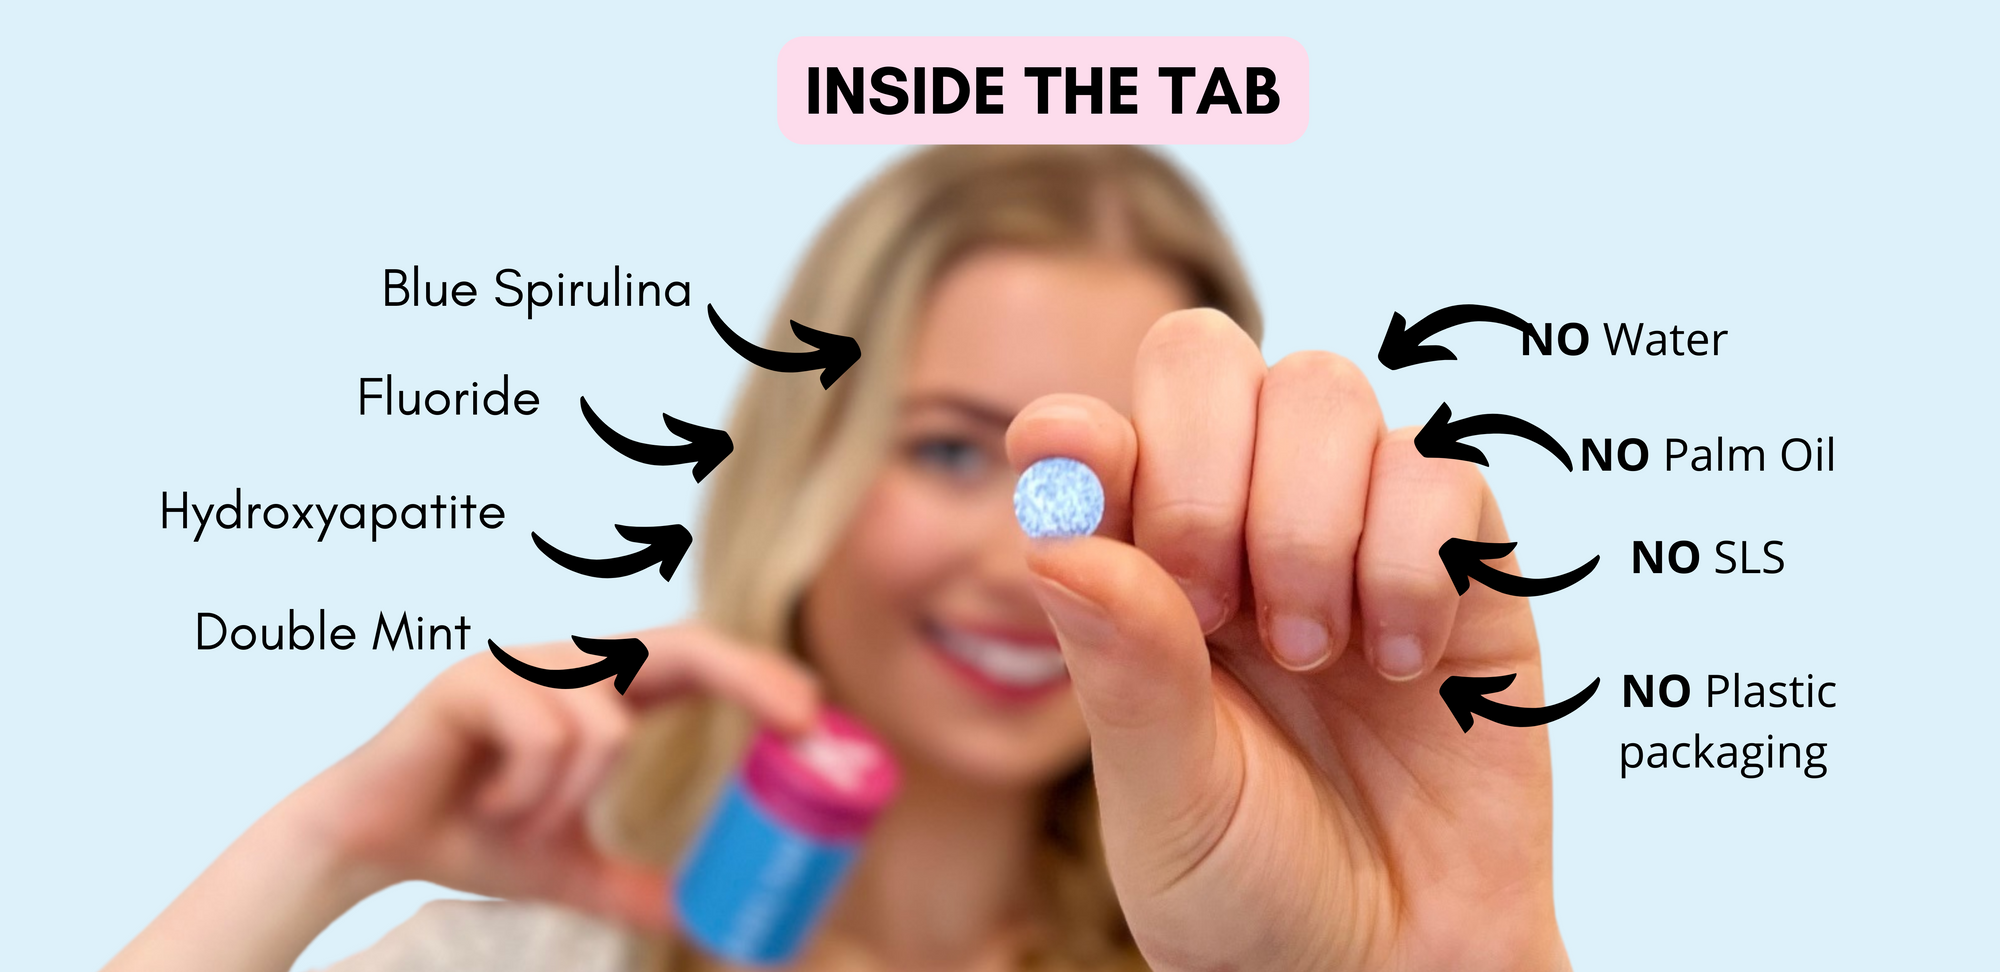 Toothpaste Tabs